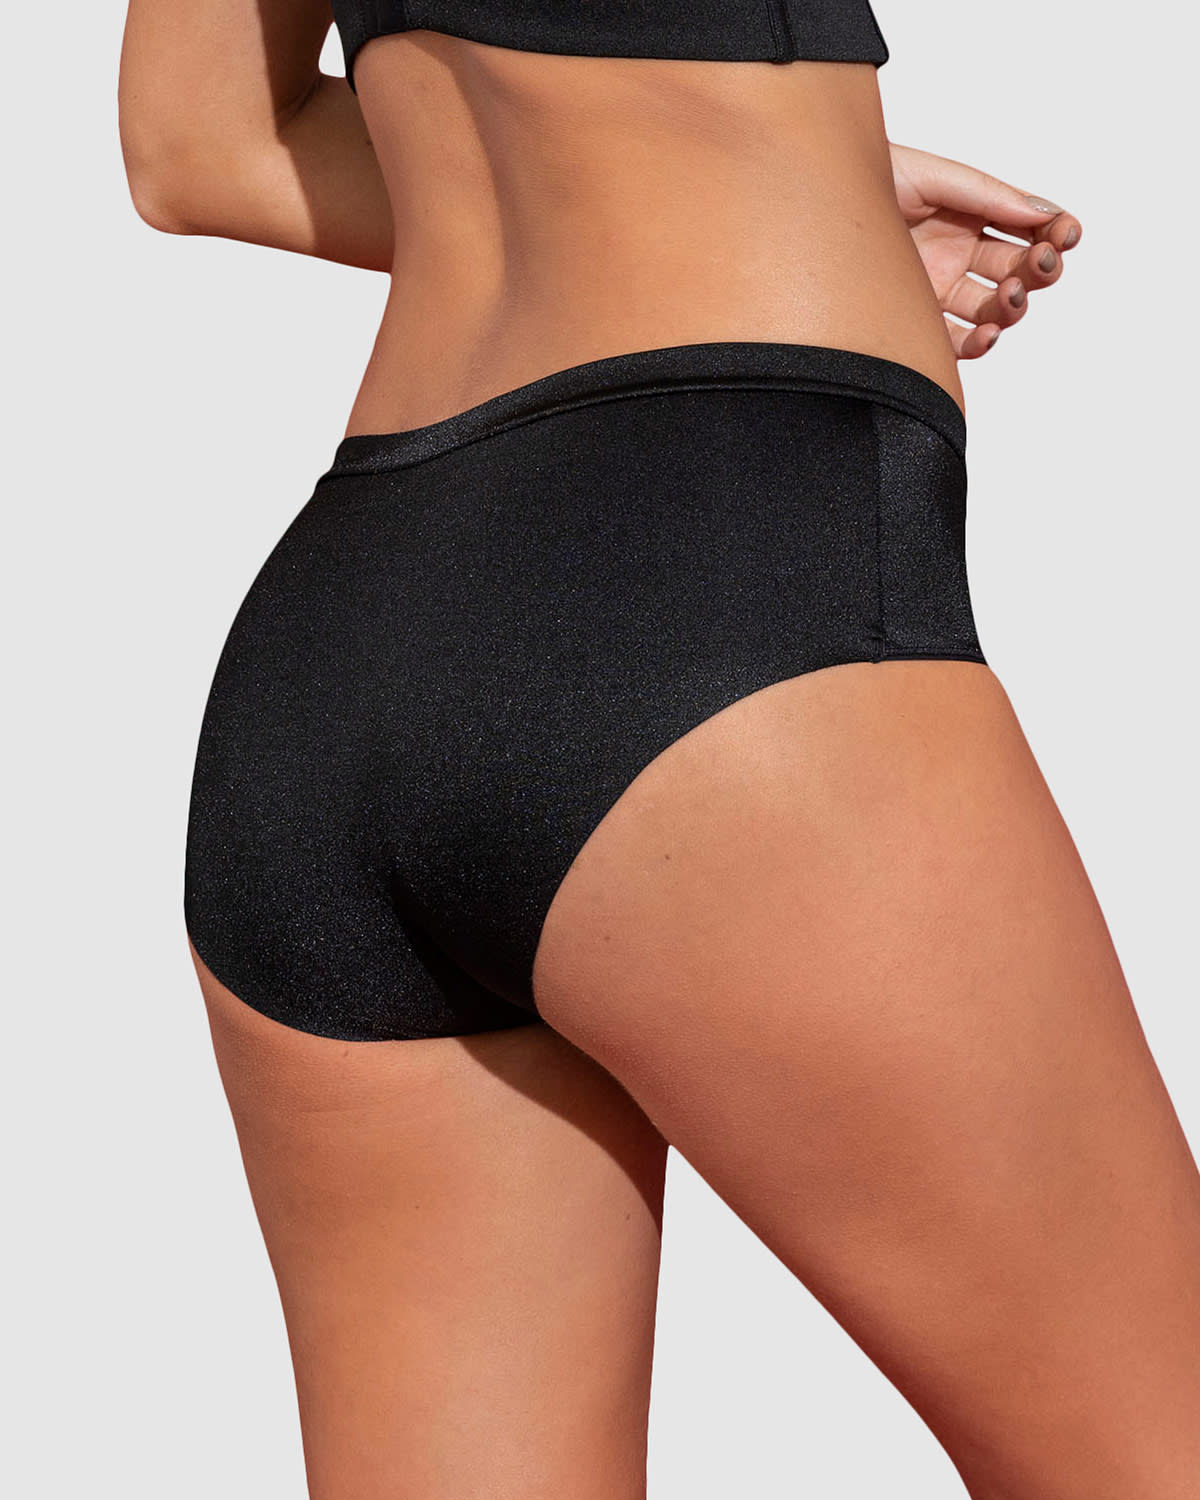 Panty Promise - Cotton underwear is a smart choice for